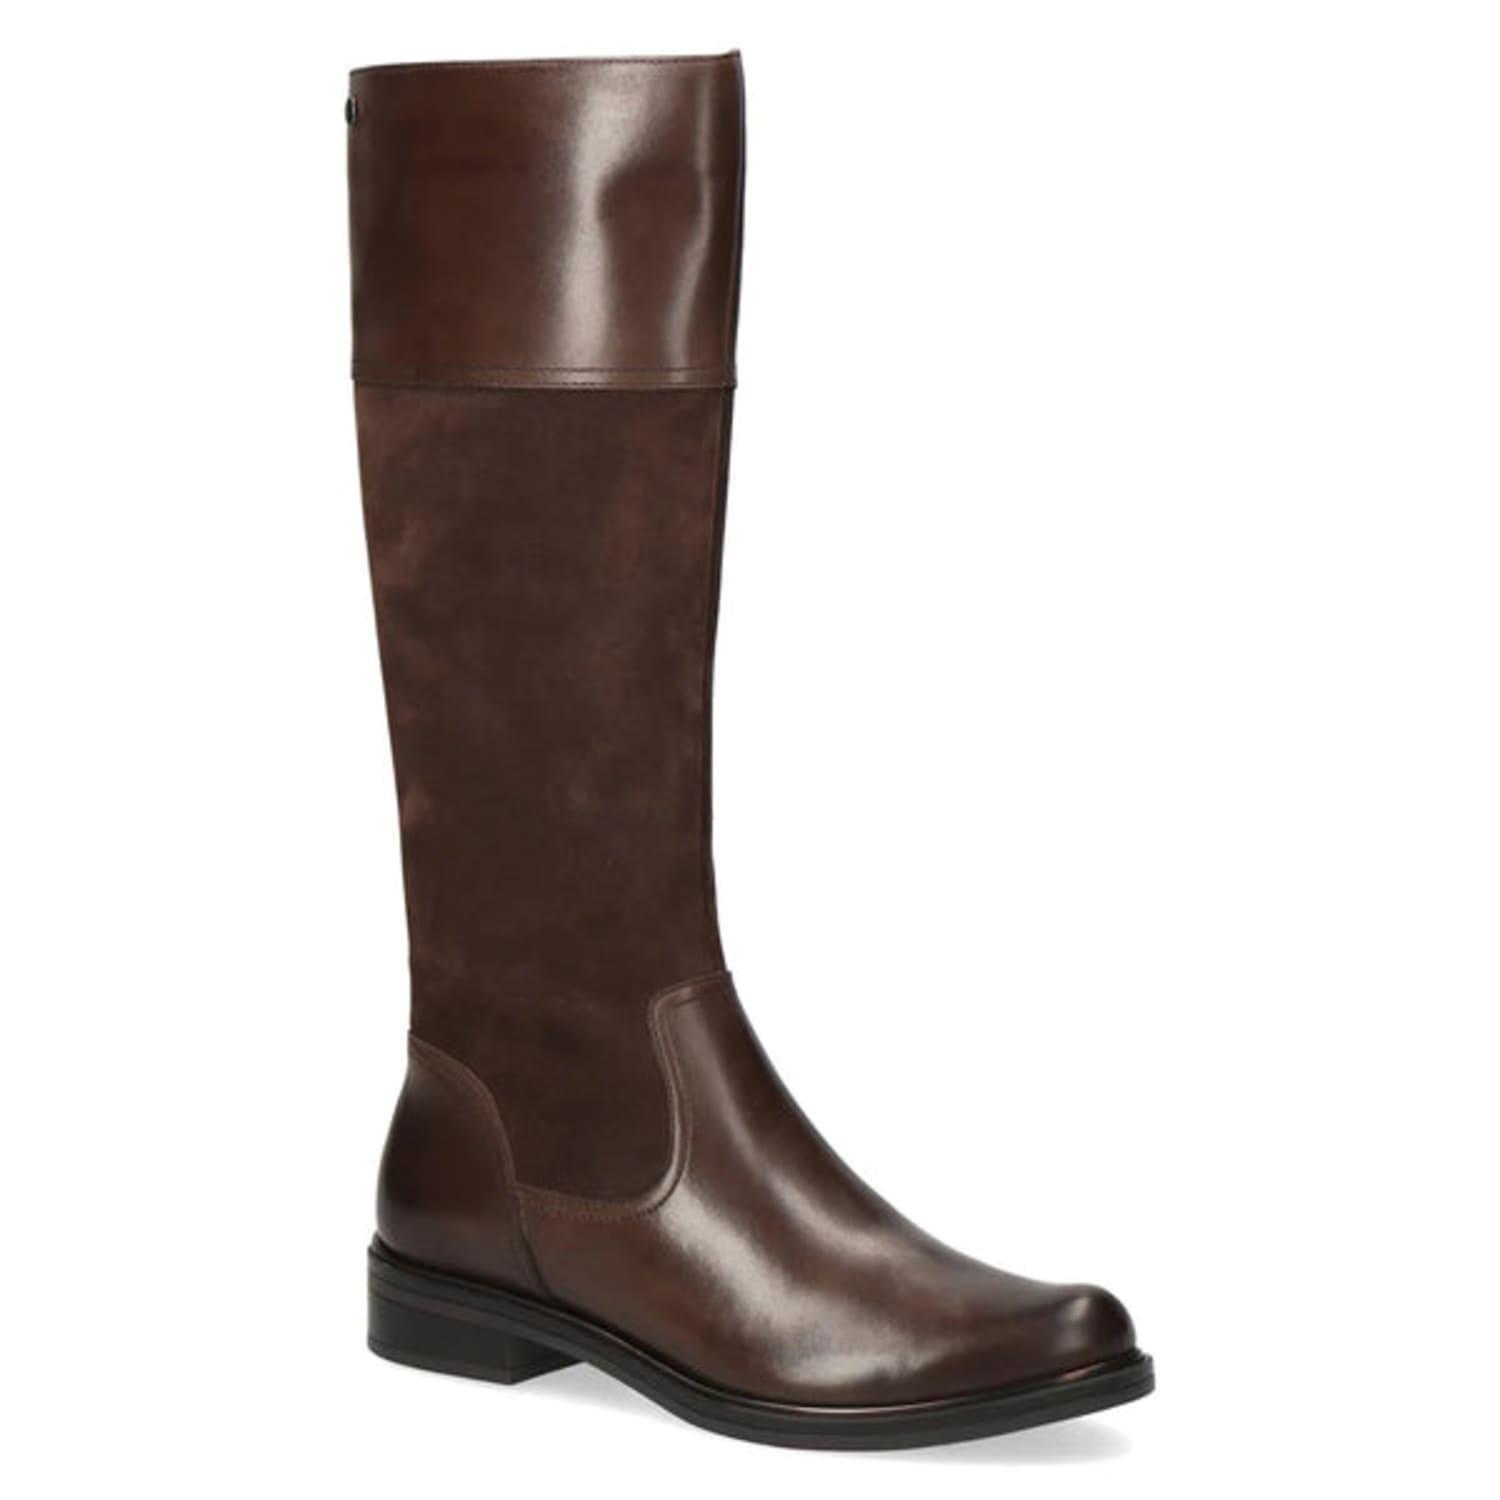 Caprice Chocolate Brown Knee High Boots | Lyst